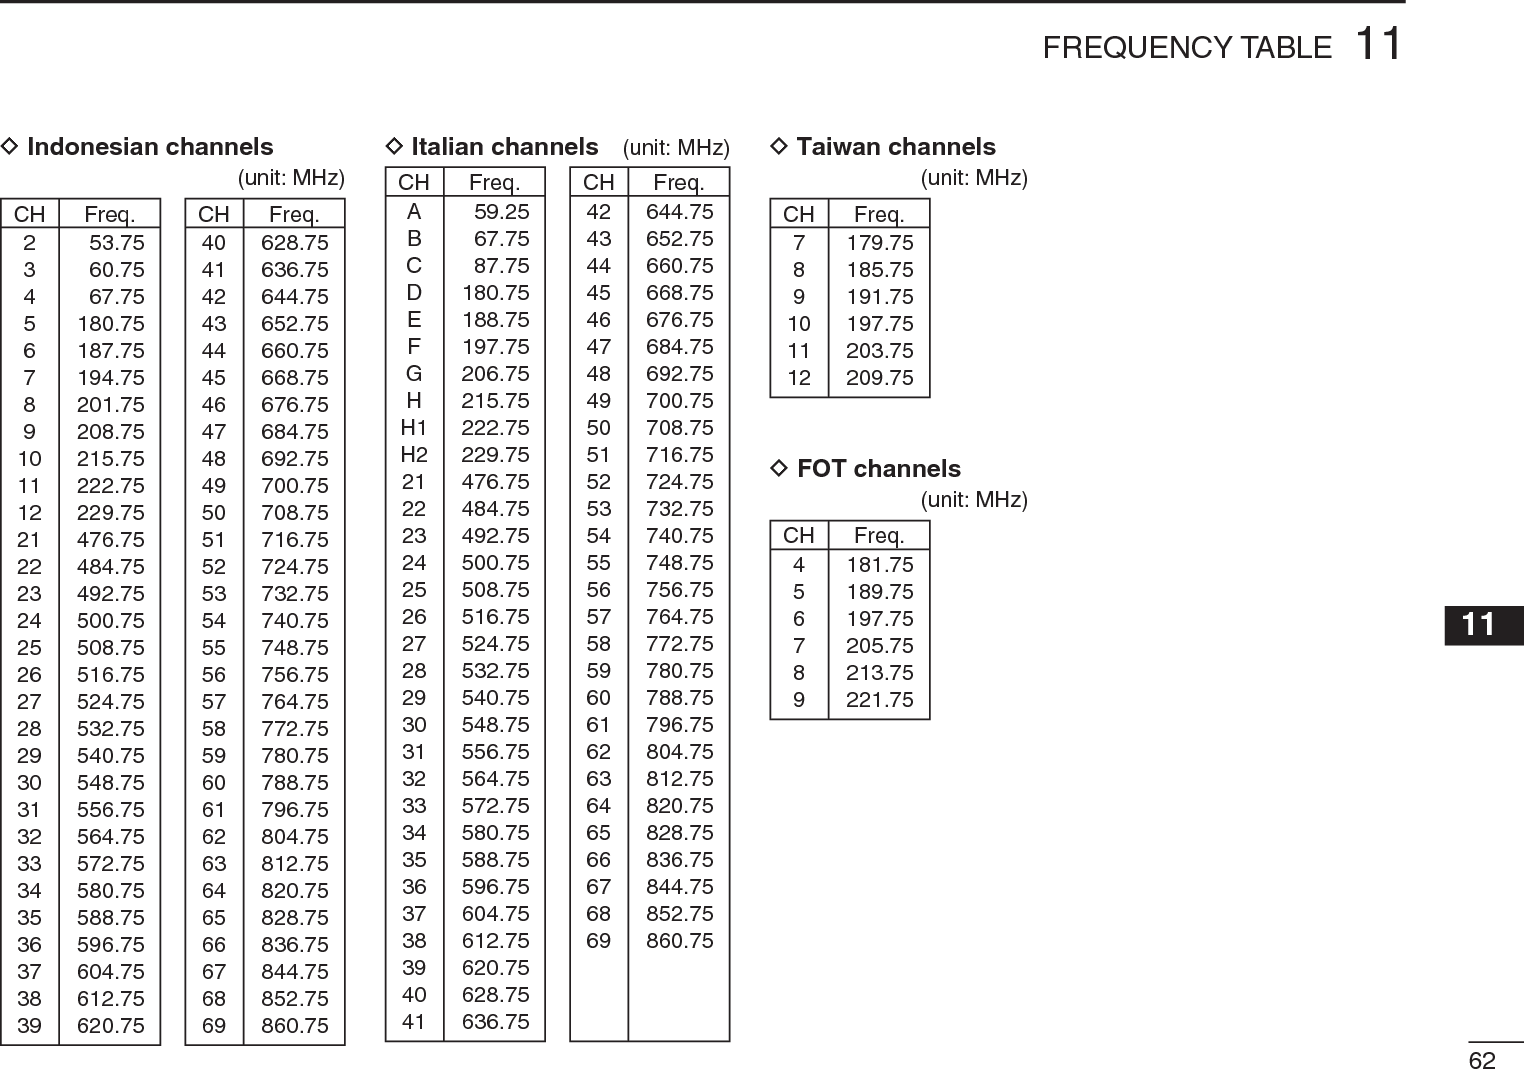 6211FREQUENCY TABLE11D Indonesian channels(unit: MHz)CH Freq.2 53.753 60.754 67.755 180.756 187.757 194.758 201.759 208.7510 215.7511 222.7512 229.7521 476.7522 484.7523 492.7524 500.7525 508.7526 516.7527 524.7528 532.7529 540.7530 548.7531 556.7532 564.7533 572.7534 580.7535 588.7536 596.7537 604.7538 612.7539 620.75CH Freq.40 628.7541 636.7542 644.7543 652.7544 660.7545 668.7546 676.7547 684.7548 692.7549 700.7550 708.7551 716.7552 724.7553 732.7554 740.7555 748.7556 756.7557 764.7558 772.7559 780.7560 788.7561 796.7562 804.7563 812.7564 820.7565 828.7566 836.7567 844.7568 852.7569 860.75D Italian channels (unit: MHz)CH Freq.A 59.25B 67.75C 87.75D 180.75E 188.75F 197.75G 206.75H 215.75H1 222.75H2 229.7521 476.7522 484.7523 492.7524 500.7525 508.7526 516.7527 524.7528 532.7529 540.7530 548.7531 556.7532 564.7533 572.7534 580.7535 588.7536 596.7537 604.7538 612.7539 620.7540 628.7541 636.75CH Freq.42 644.7543 652.7544 660.7545 668.7546 676.7547 684.7548 692.7549 700.7550 708.7551 716.7552 724.7553 732.7554 740.7555 748.7556 756.7557 764.7558 772.7559 780.7560 788.7561 796.7562 804.7563 812.7564 820.7565 828.7566 836.7567 844.7568 852.7569 860.75D Taiwan channels(unit: MHz)CH Freq.7 179.758 185.759 191.7510 197.7511 203.7512 209.75D FOT channels(unit: MHz)CH Freq.4 181.755 189.756 197.757 205.758 213.759 221.75